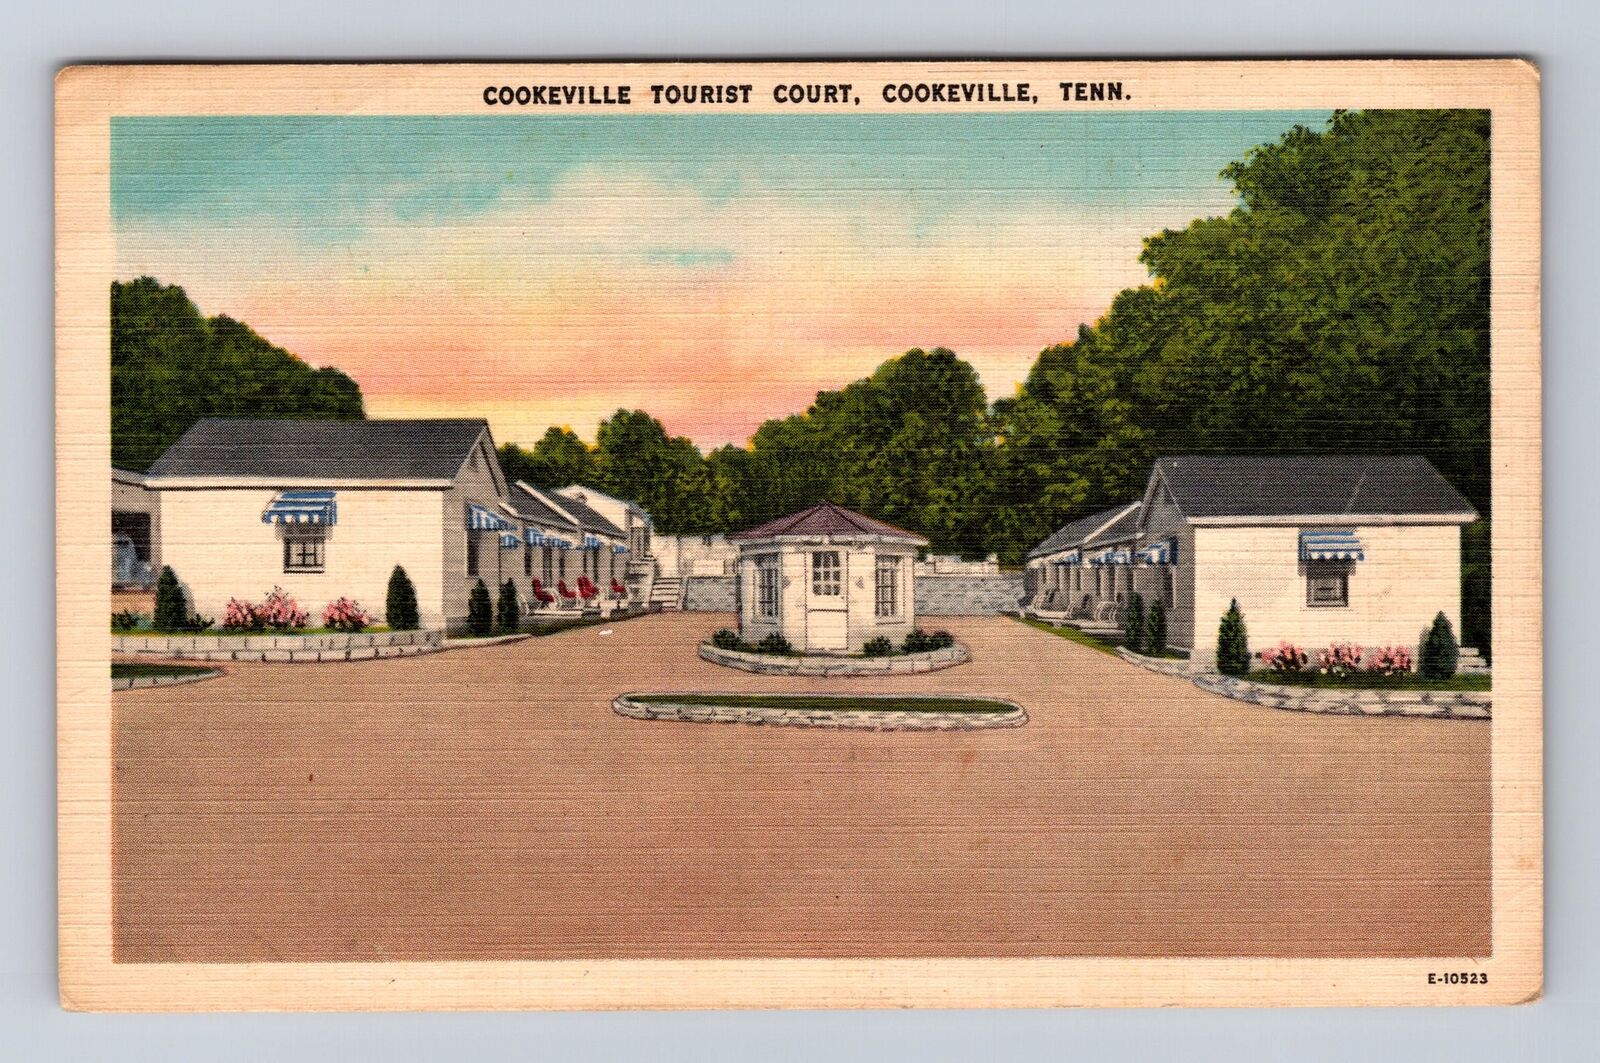 Cookeville Tourist Court TN-Tennessee, US 70 N, Advertising, Vintage Postcard